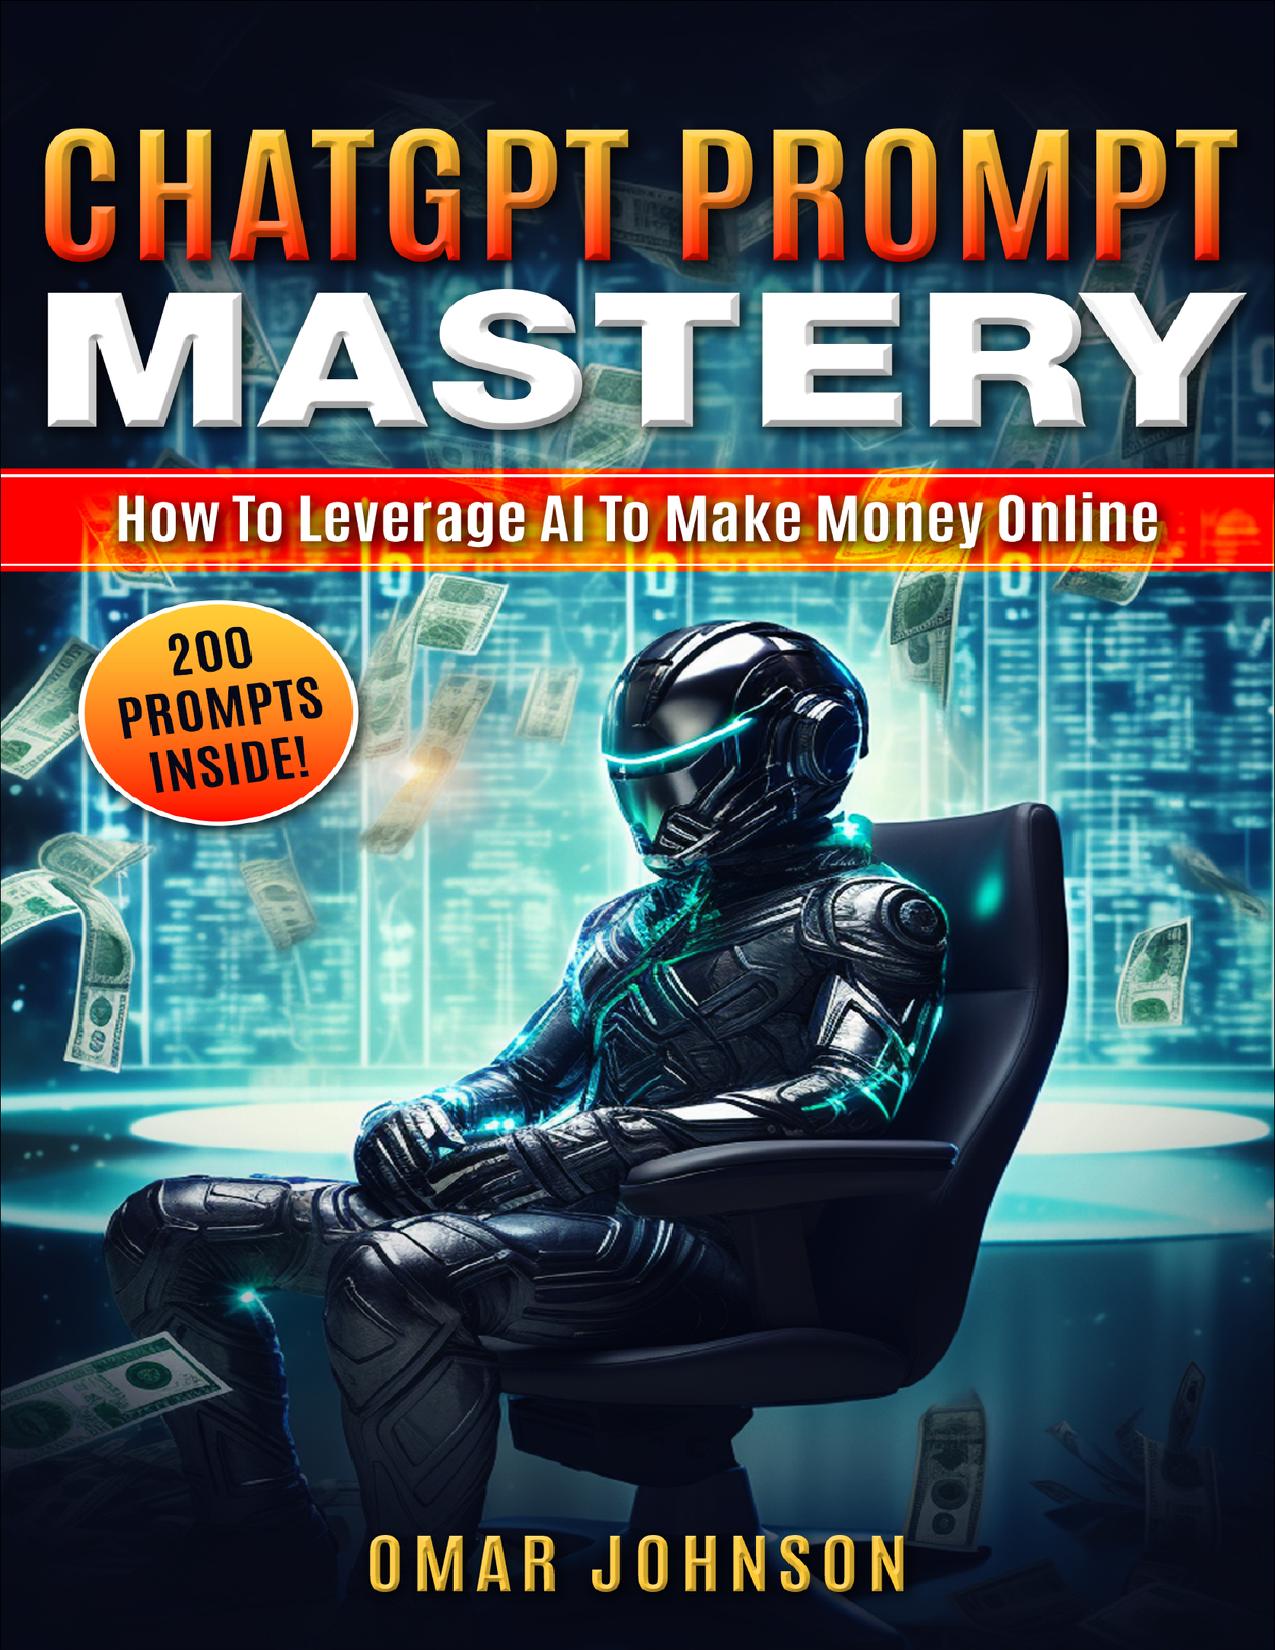 ChatGPT Prompt Mastery: How to Leverage AI to Make Money Online